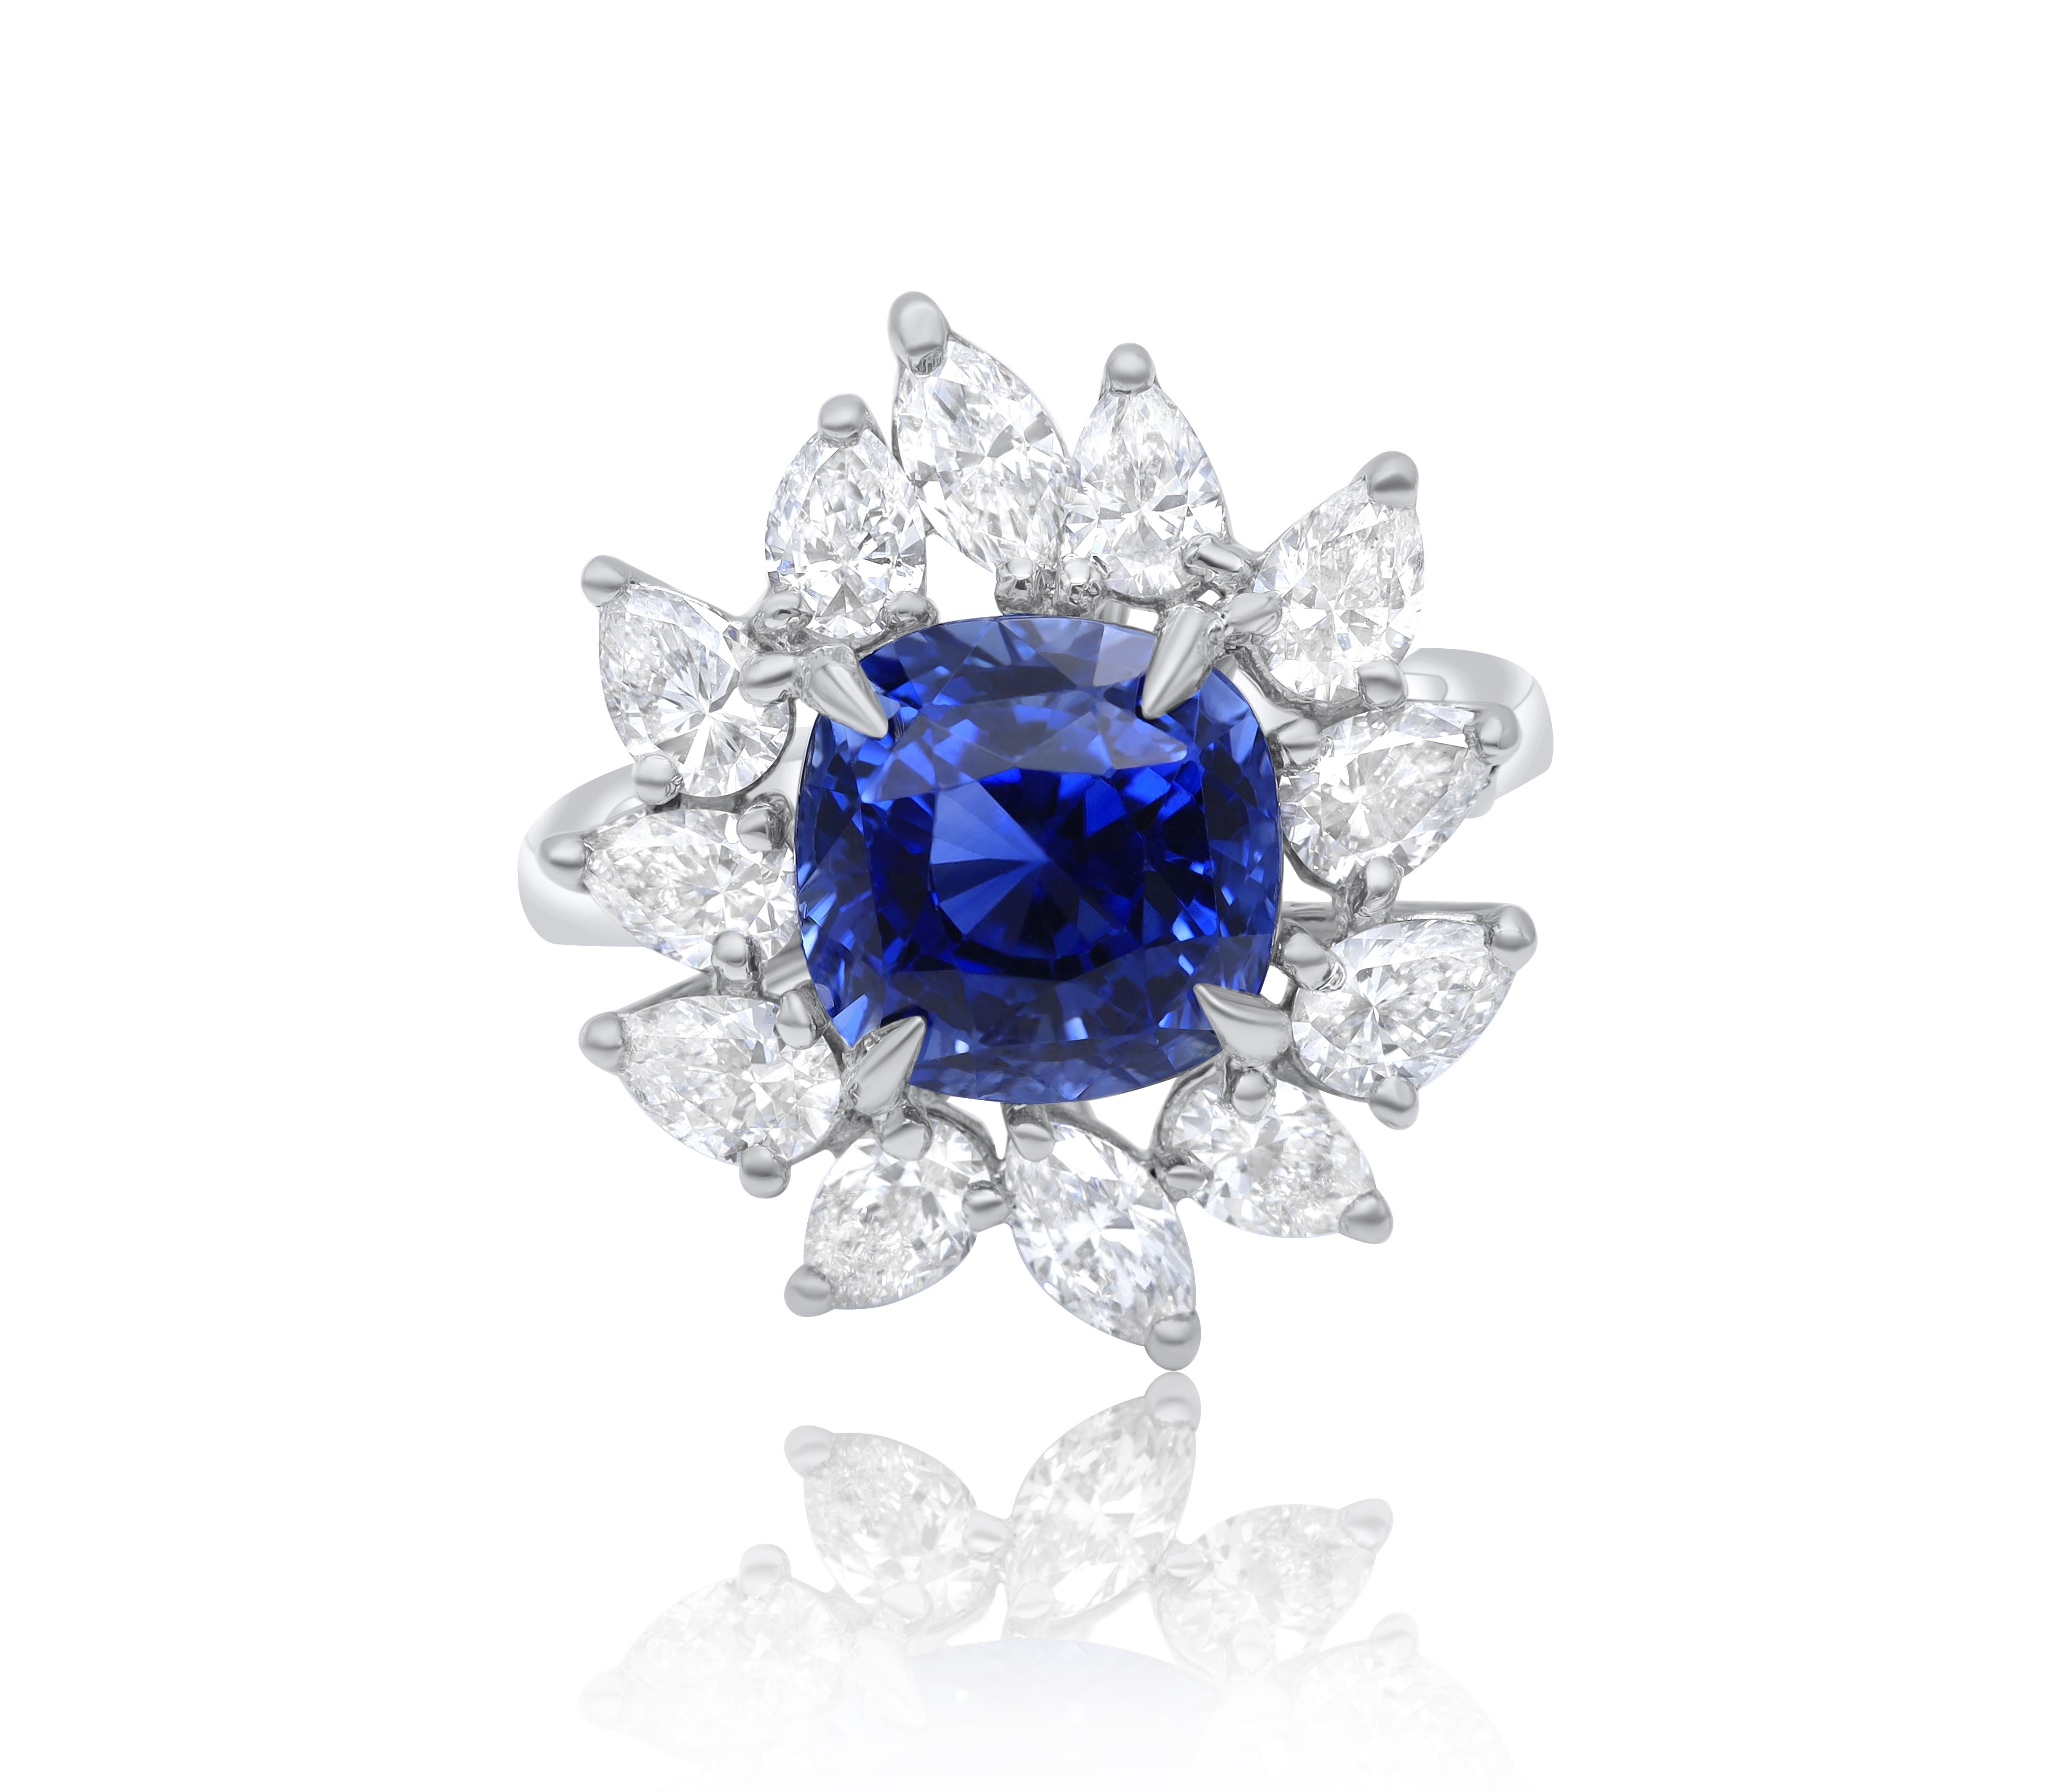 Platinum sapphire diamond Princess Diana ring featuring a 6.00 ct cushion cut sapphire (C.Dunaigre certified) surrounded by 3.02 cts tw of diamonds in a flower design.
Diana M. is a leading supplier of top-quality fine jewelry for over 35